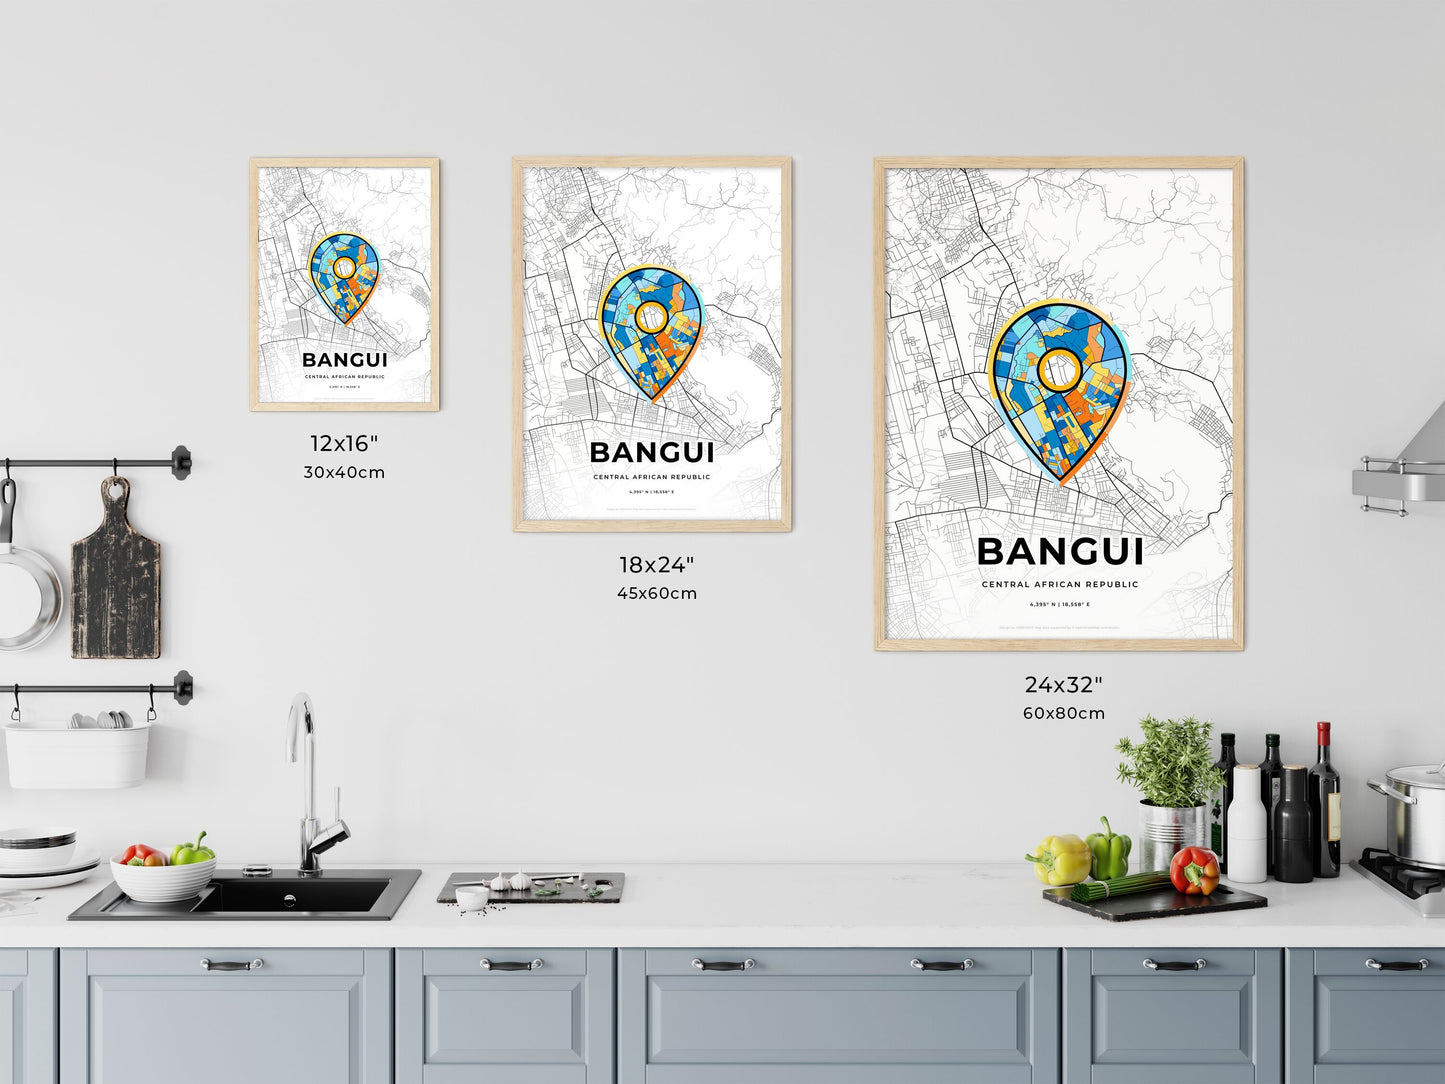 BANGUI CENTRAL AFRICAN REPUBLIC minimal art map with a colorful icon. Where it all began, Couple map gift.